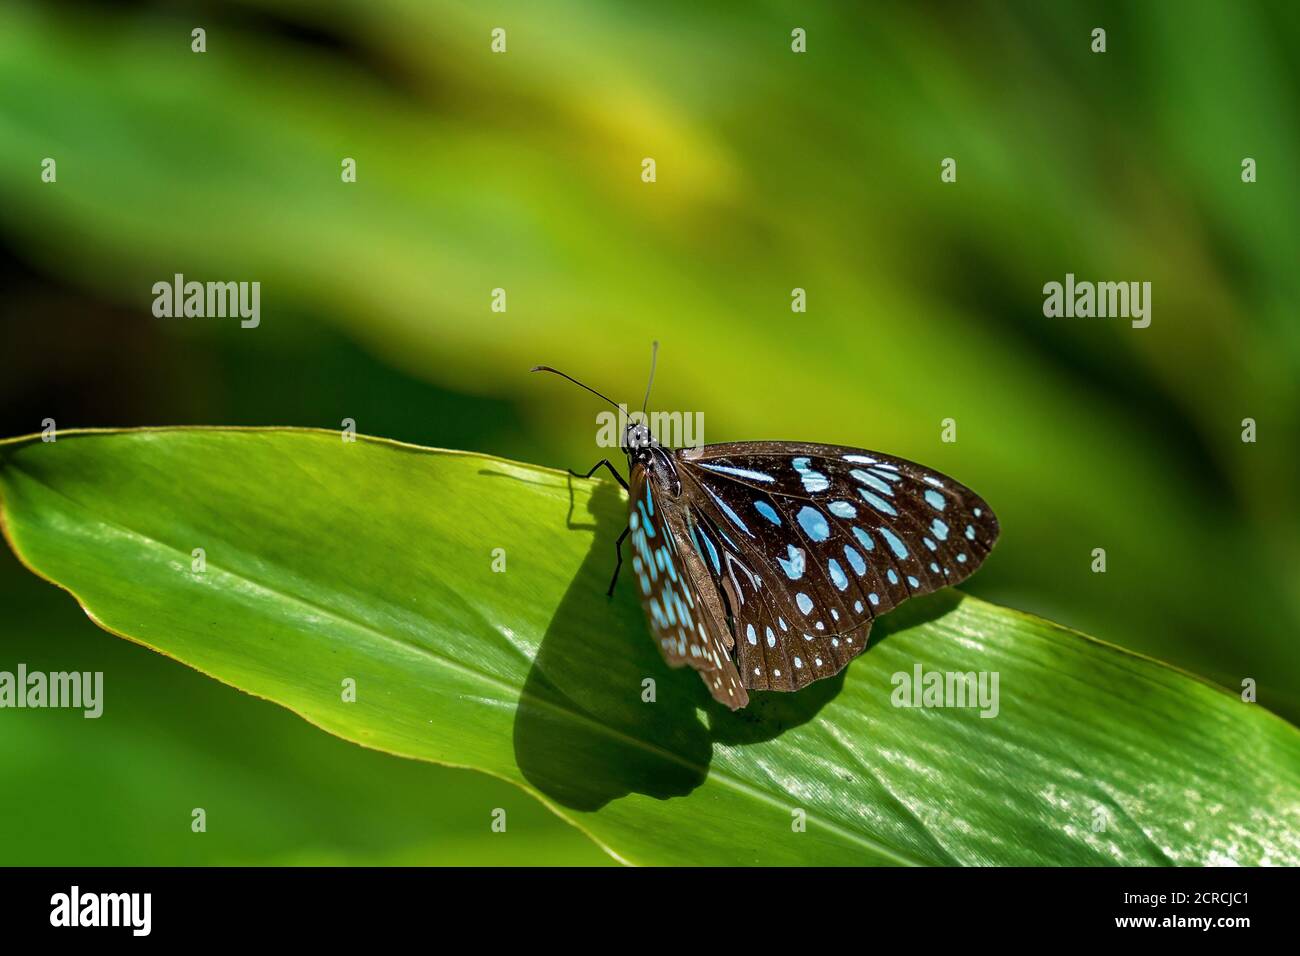 A Blue Tiger butterfly on a leaf Stock Photo